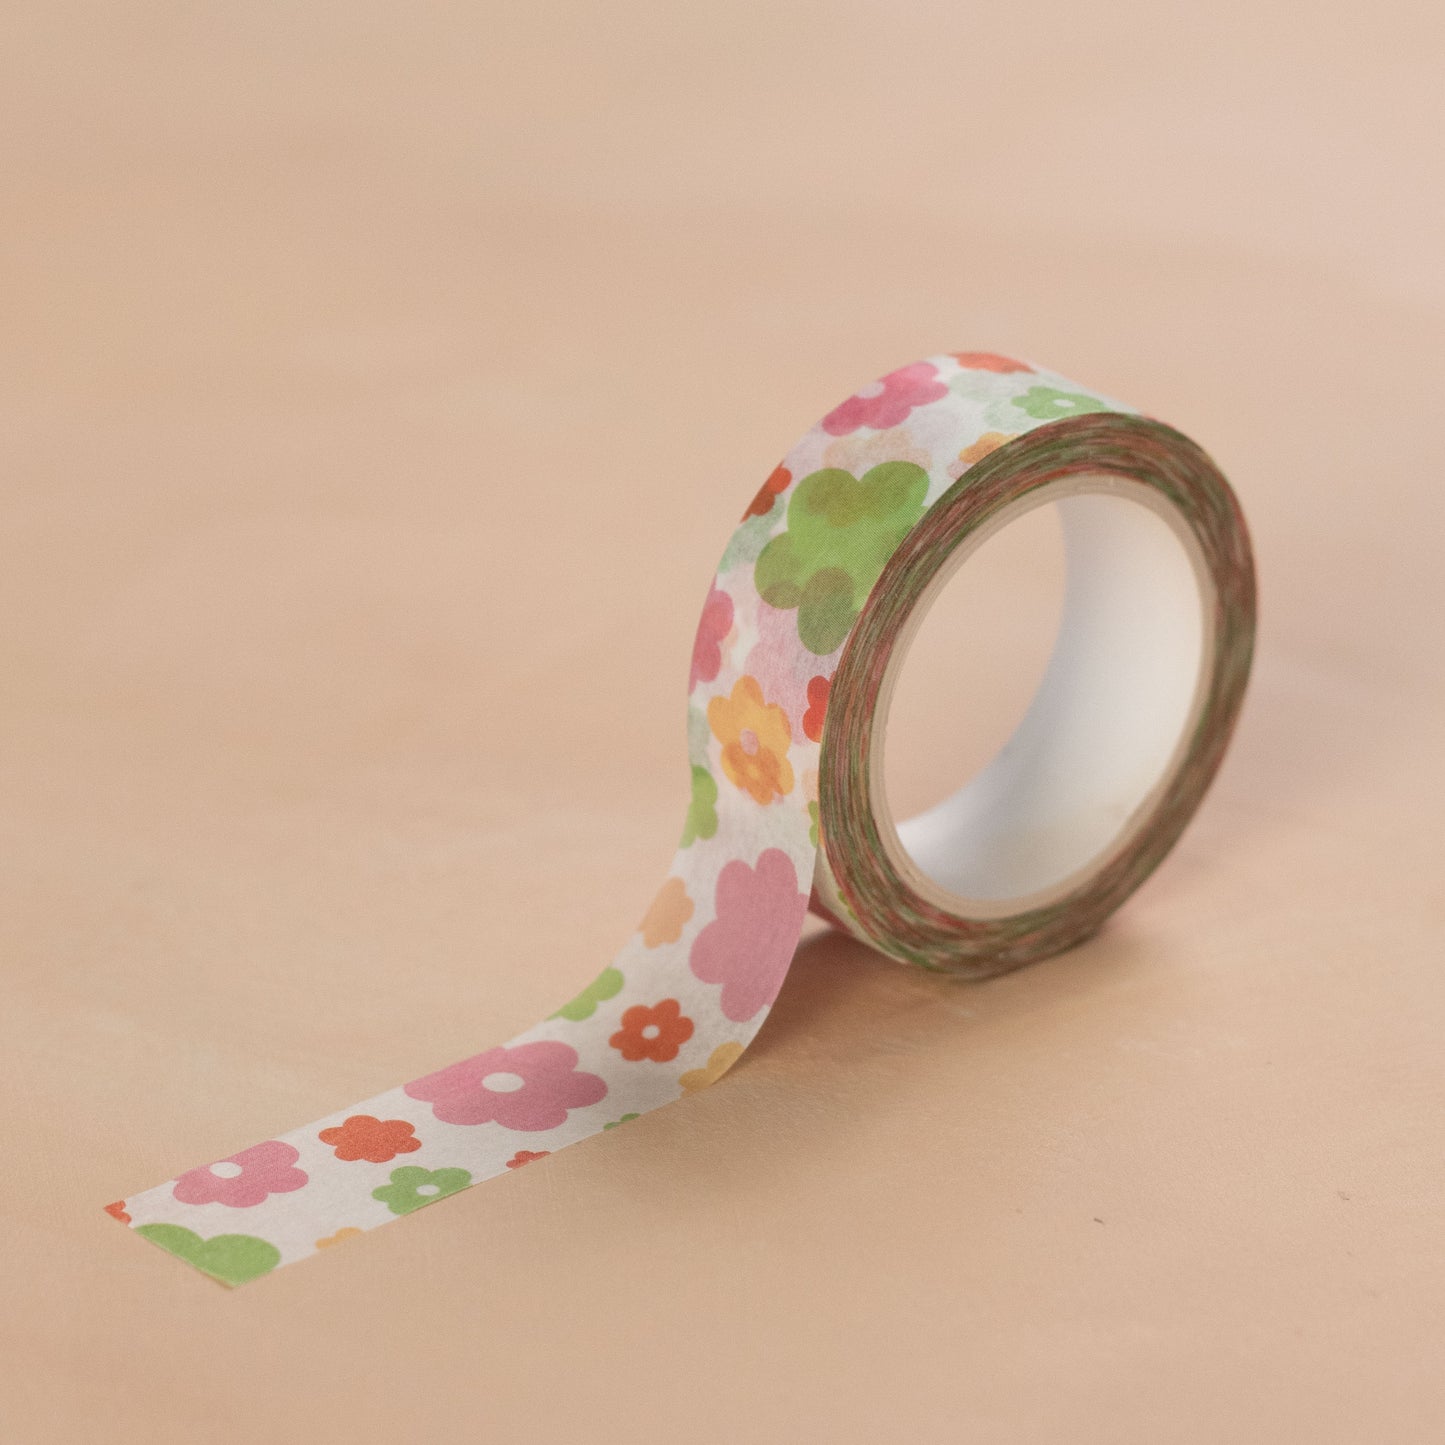 A graphic print floral washi tape on a beige background.